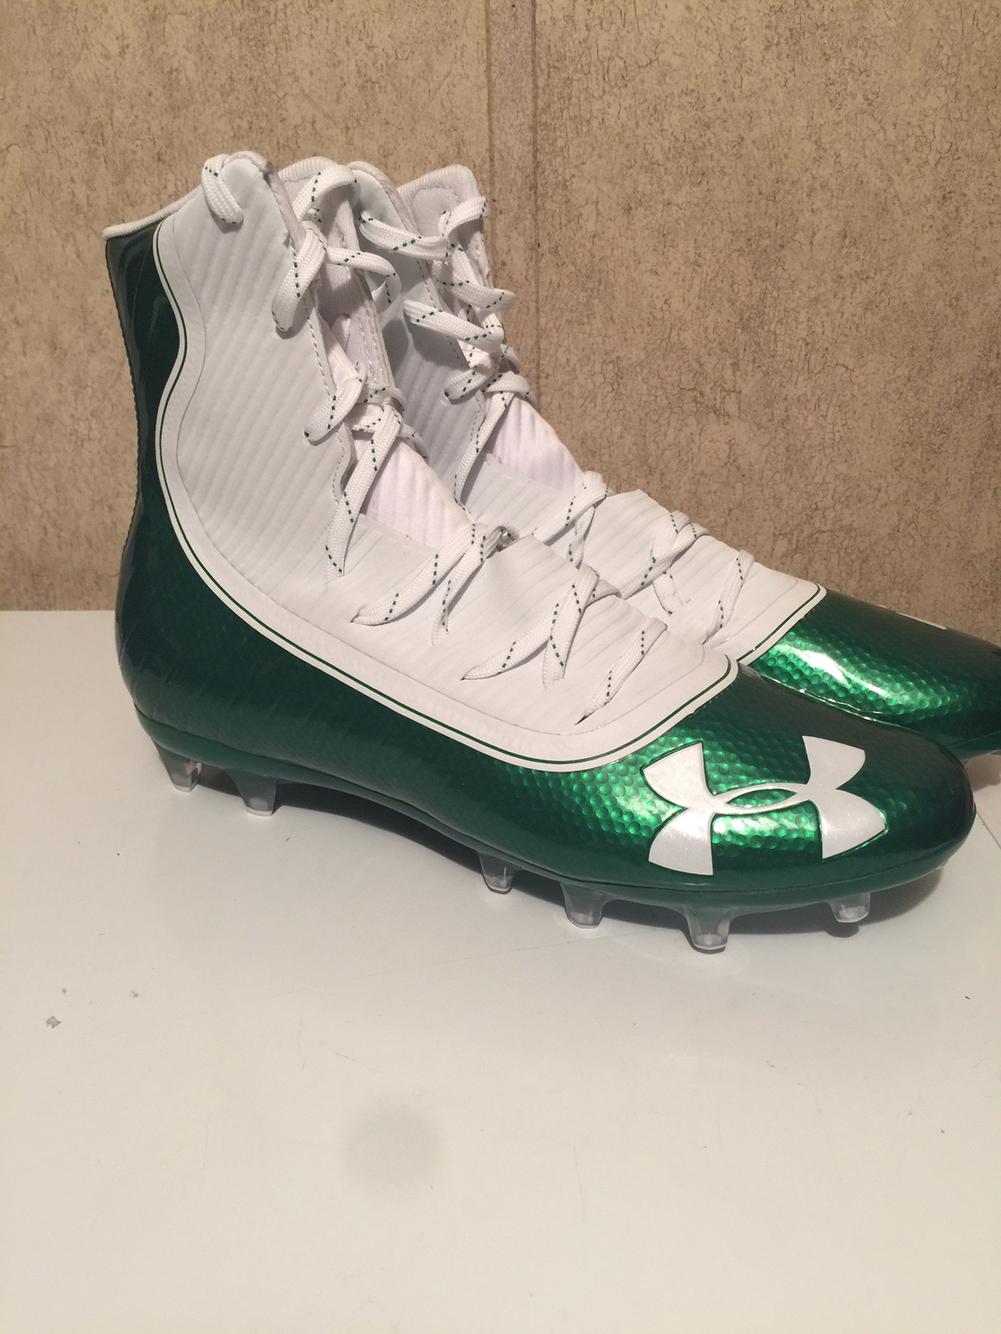 Under Armour UA Highlight Lux MC Green/White Mens Football Cleats 10.5 US